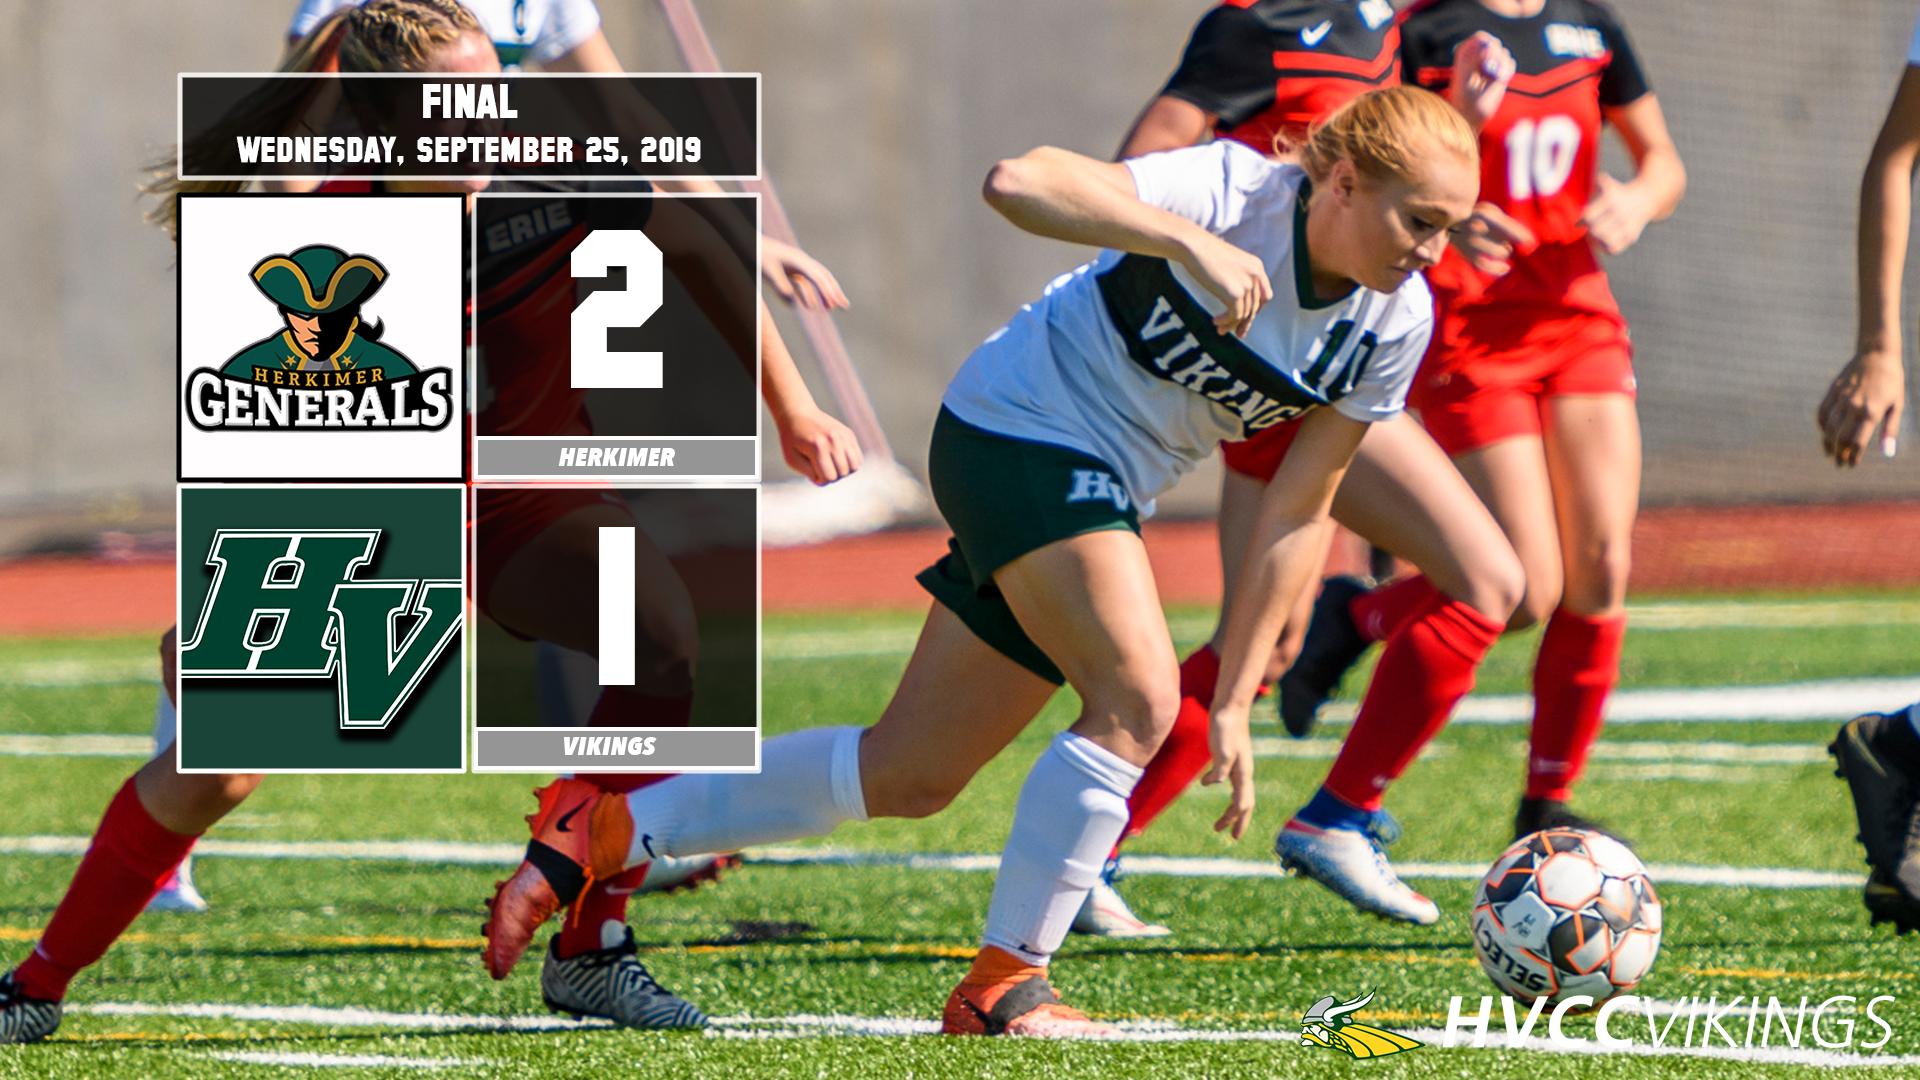 Women's soccer lost 2-1 to Herkimer on 9.25.19